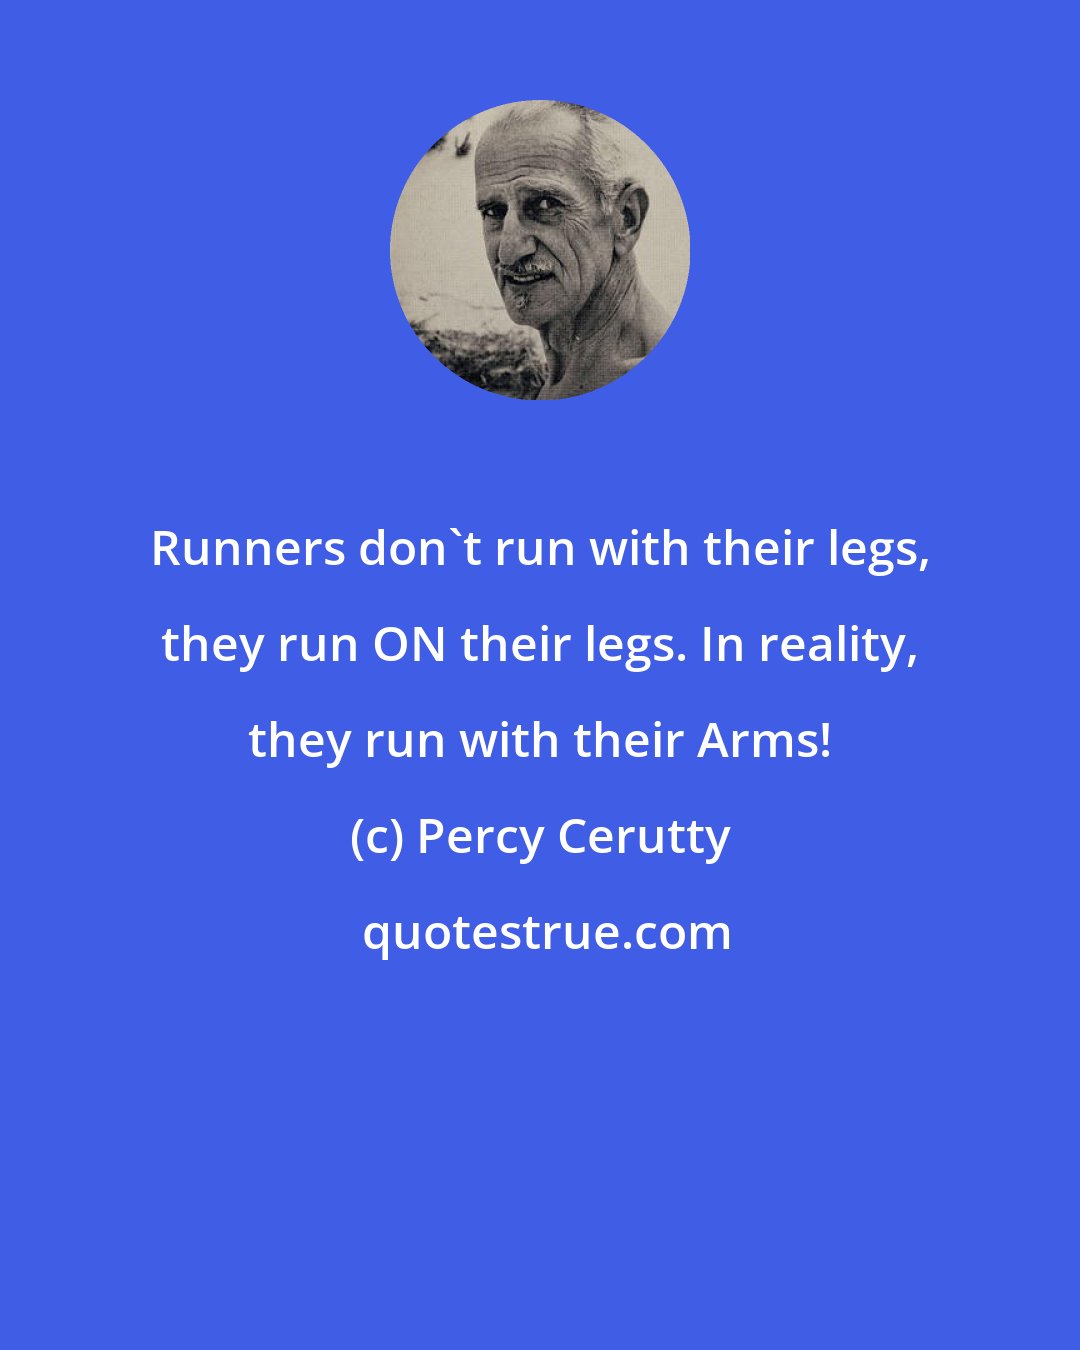 Percy Cerutty: Runners don't run with their legs, they run ON their legs. In reality, they run with their Arms!